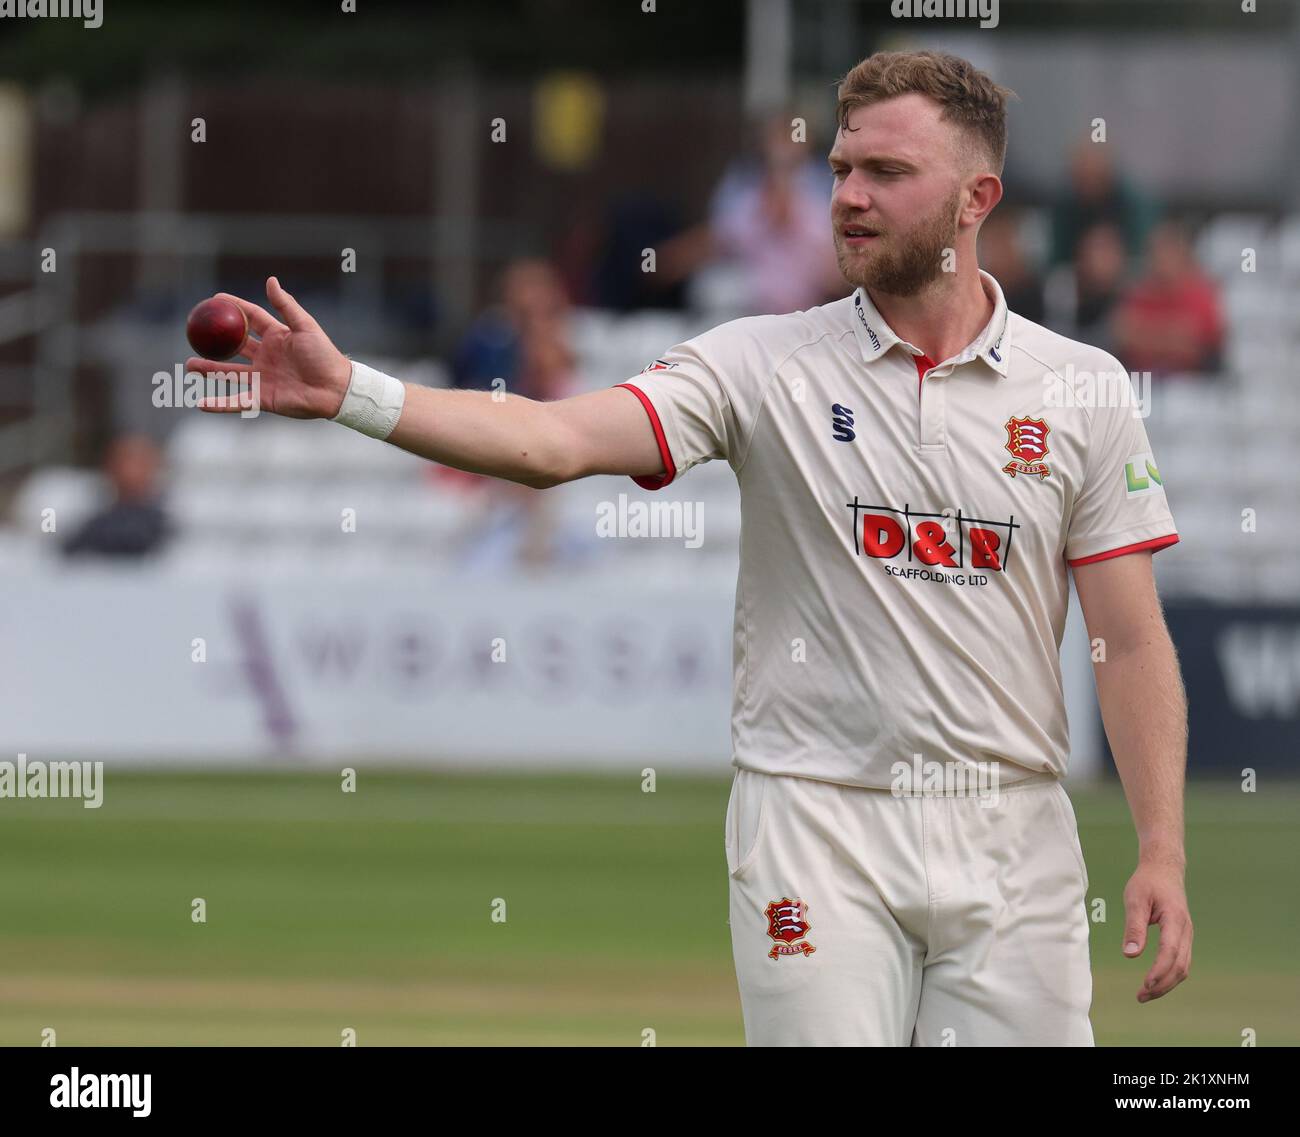 CHELMSFORD ENGLAND - SEPTEMBER 20 : Essex's Simon Cook during LV= COUNTY CHAMPIONSHIP - DIVISION ONE Day One of 4 match between Essex CCC against Lanc Stock Photo